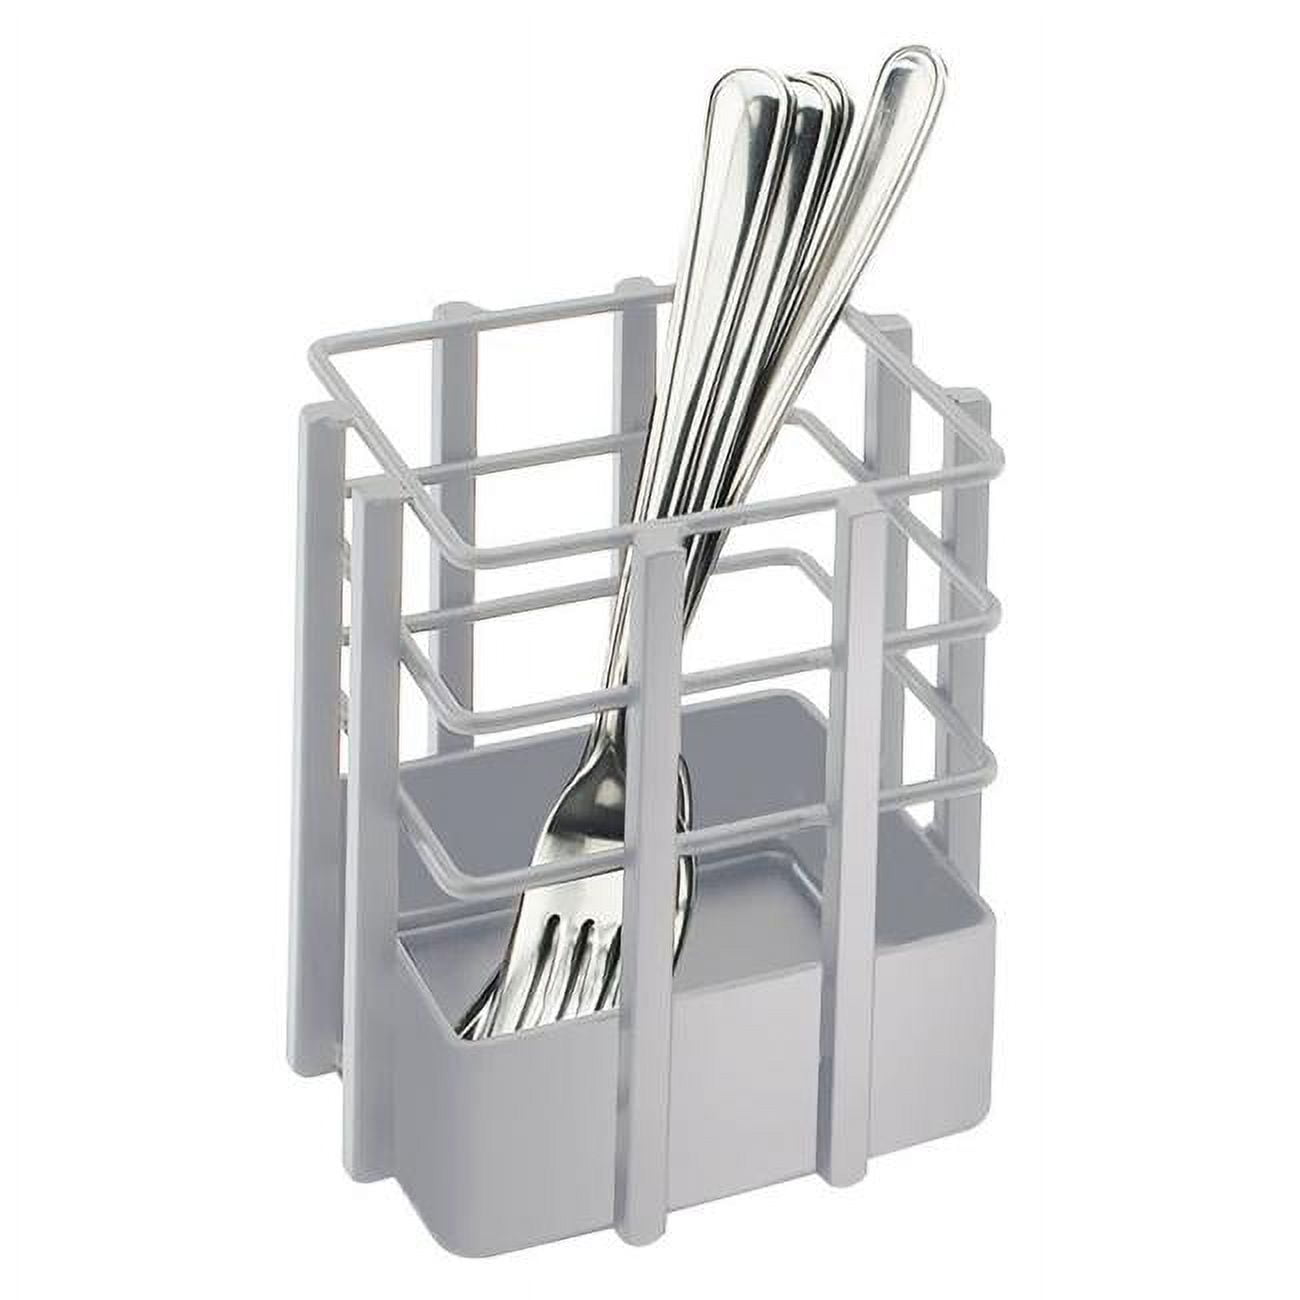 Picture of Cal Mil 1544-74 Soho Silver Single Slot Metal Flatware Organizer - 4 x 4 x 4.5 in.